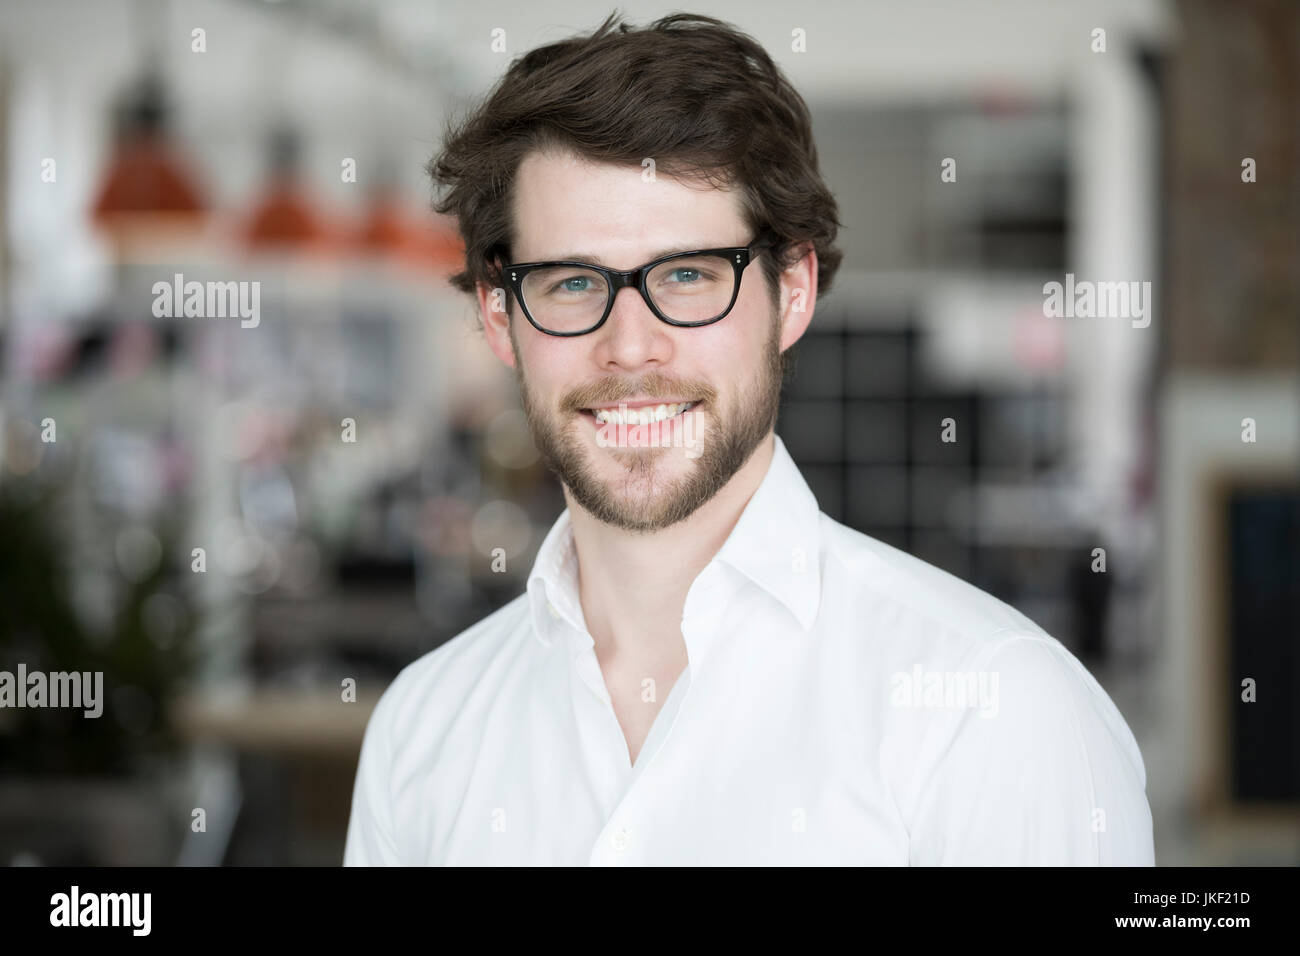 Young businessman wearing glasses, portrait Stock Photo